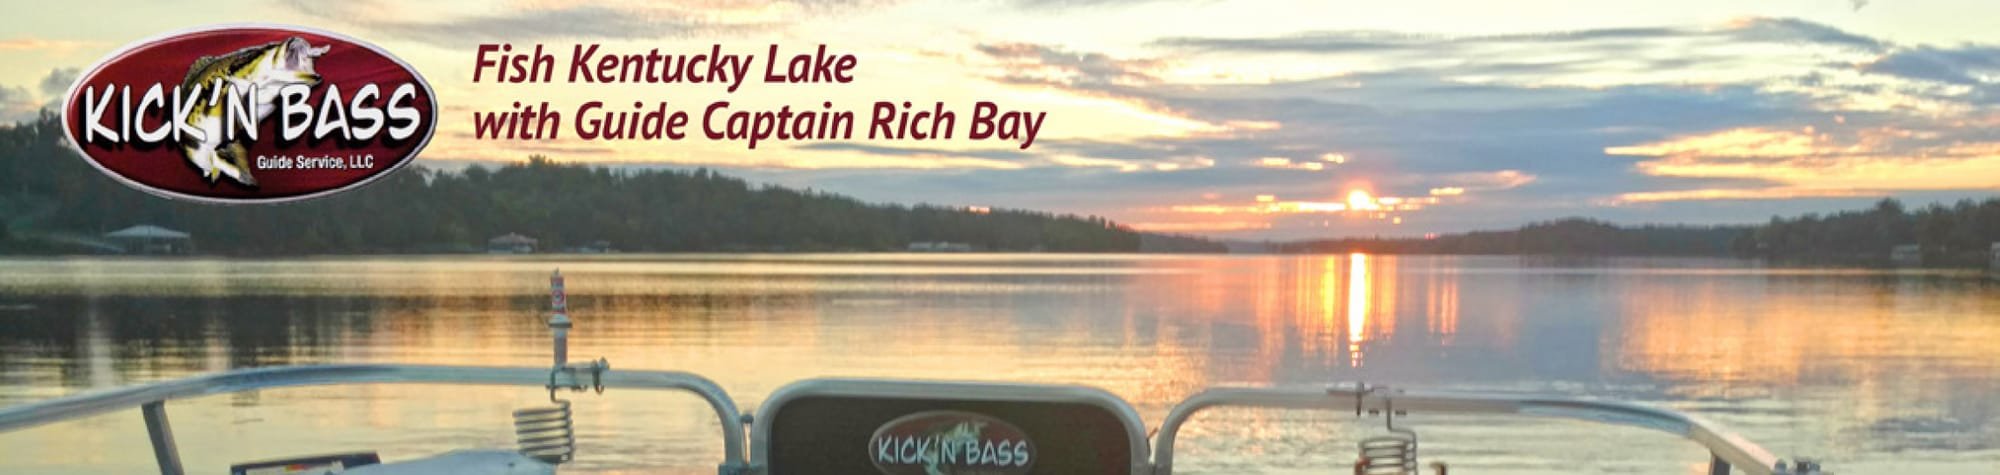 Your Kick'n Bass Fishing Report for June 17, 2020